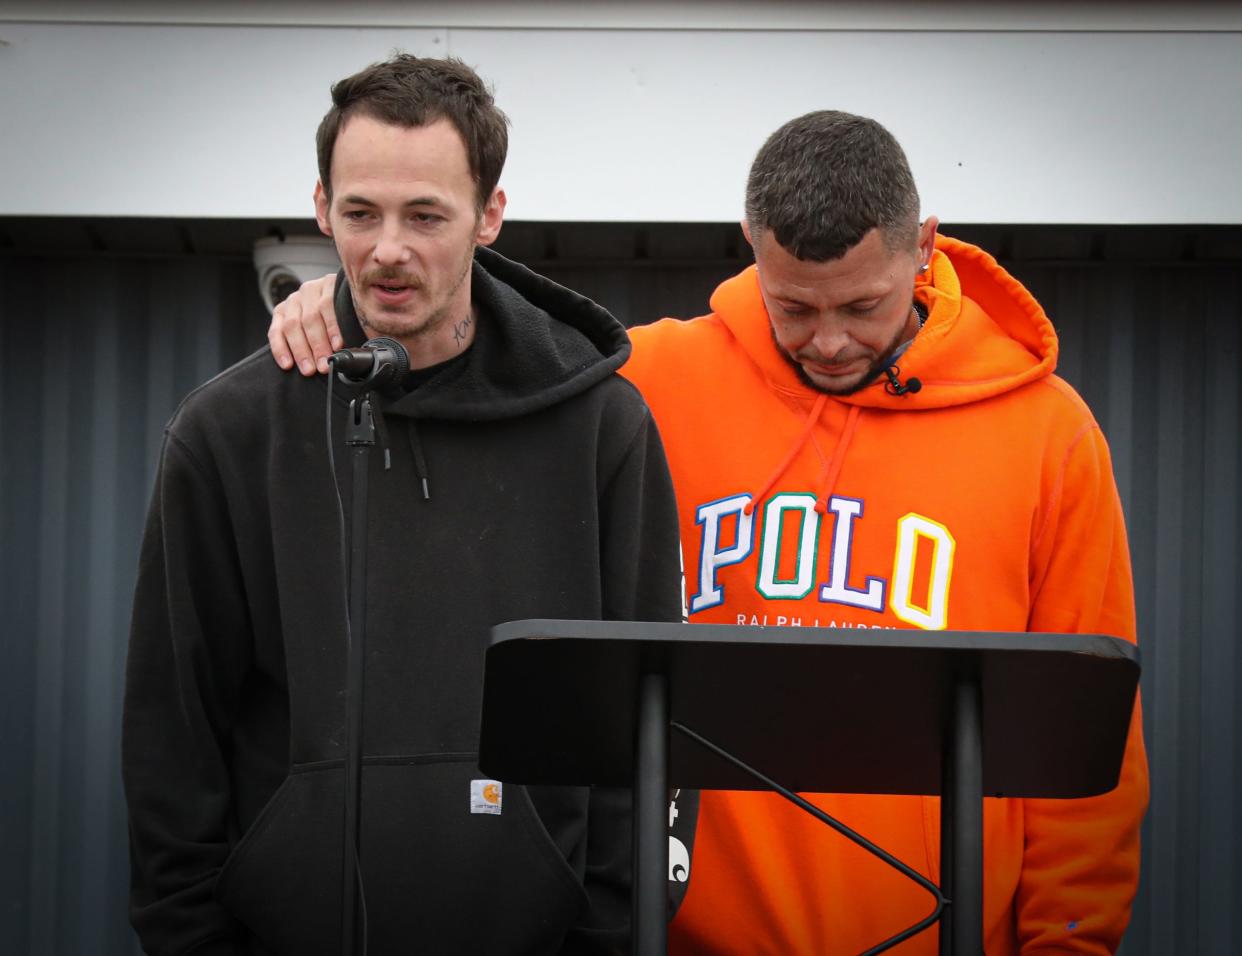 Nicholas Phillips and Michael Hatfield, both uncles to Alanah and Zayn Phillips, speak to the crowd at the vigil held at the Swan Boat Club, Newport, on Friday.